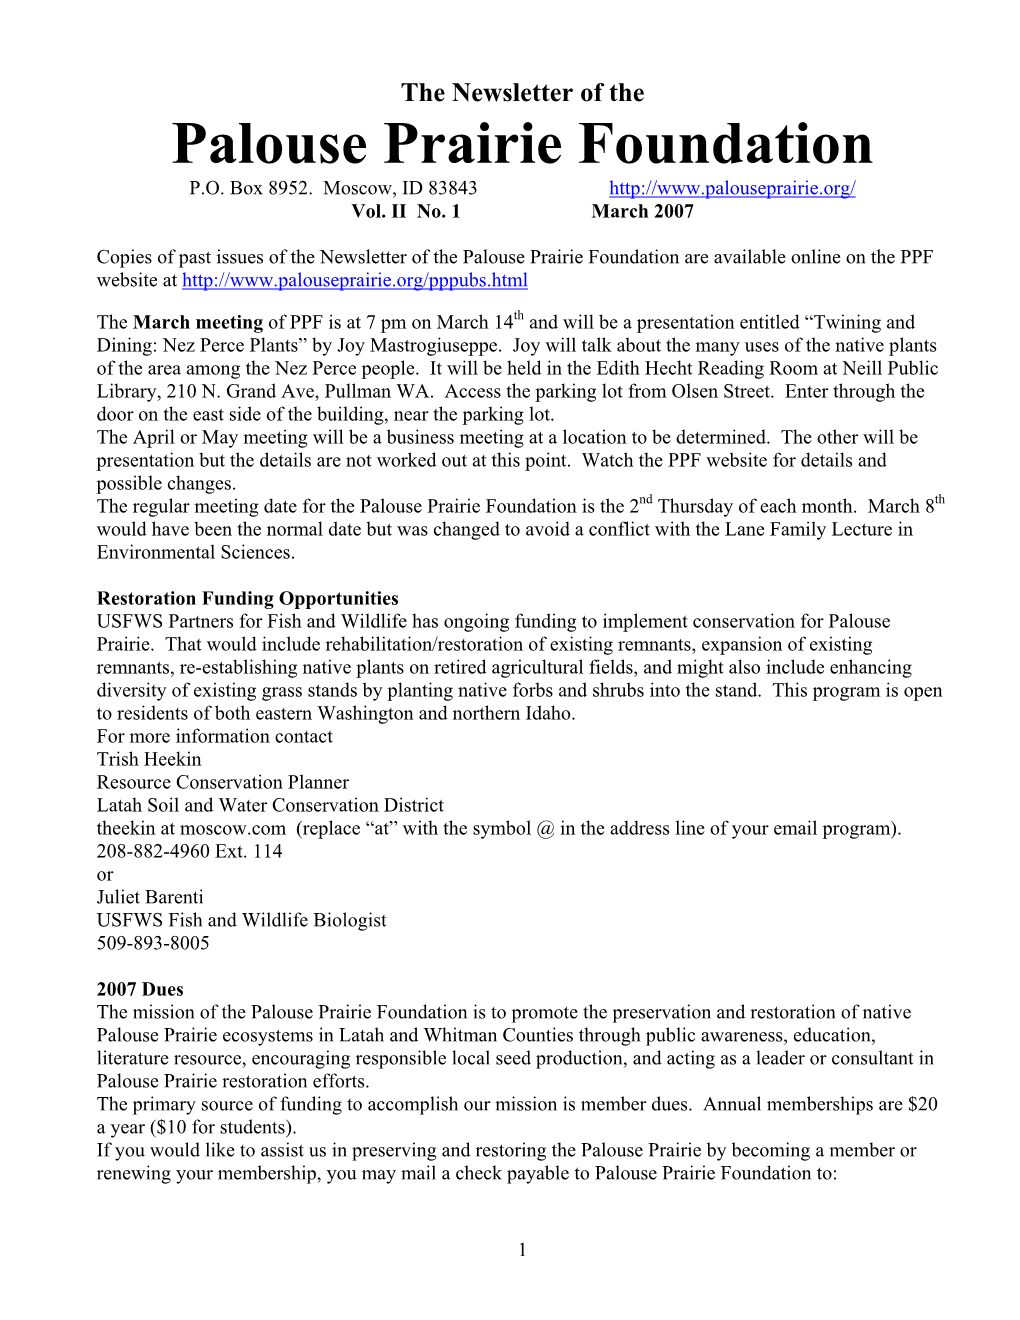 The Newsletter of the Palouse Prairie Foundation P.O